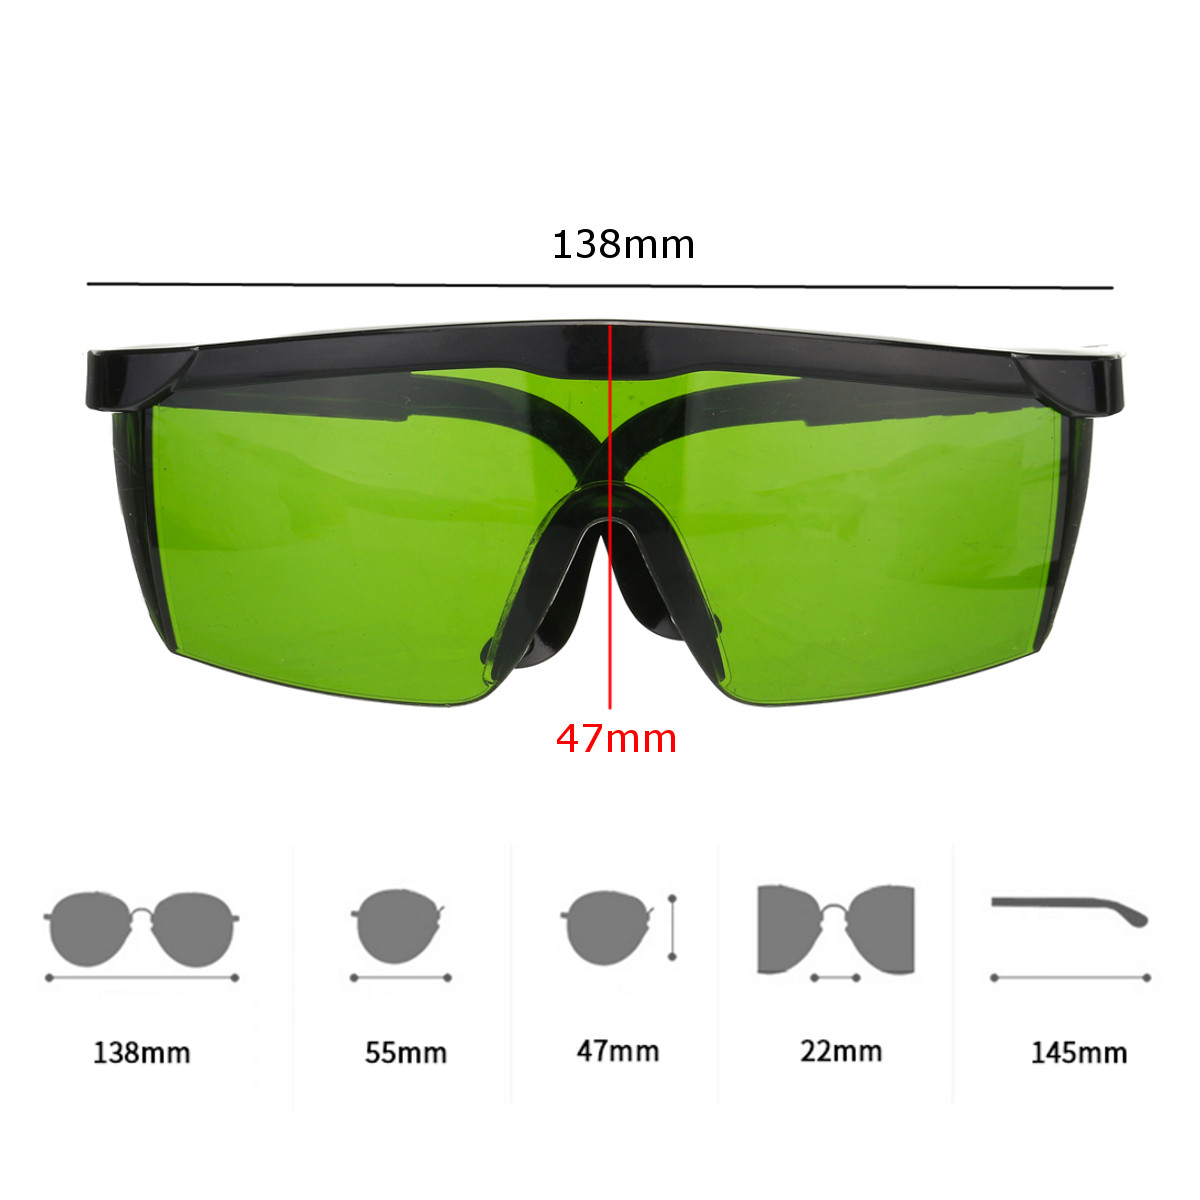 Pro-Laser-Protection-Goggles-Protective-Safety-Glasses-IPL-OD4D-190nm-2000nm-Laser-Goggles-1424199-4